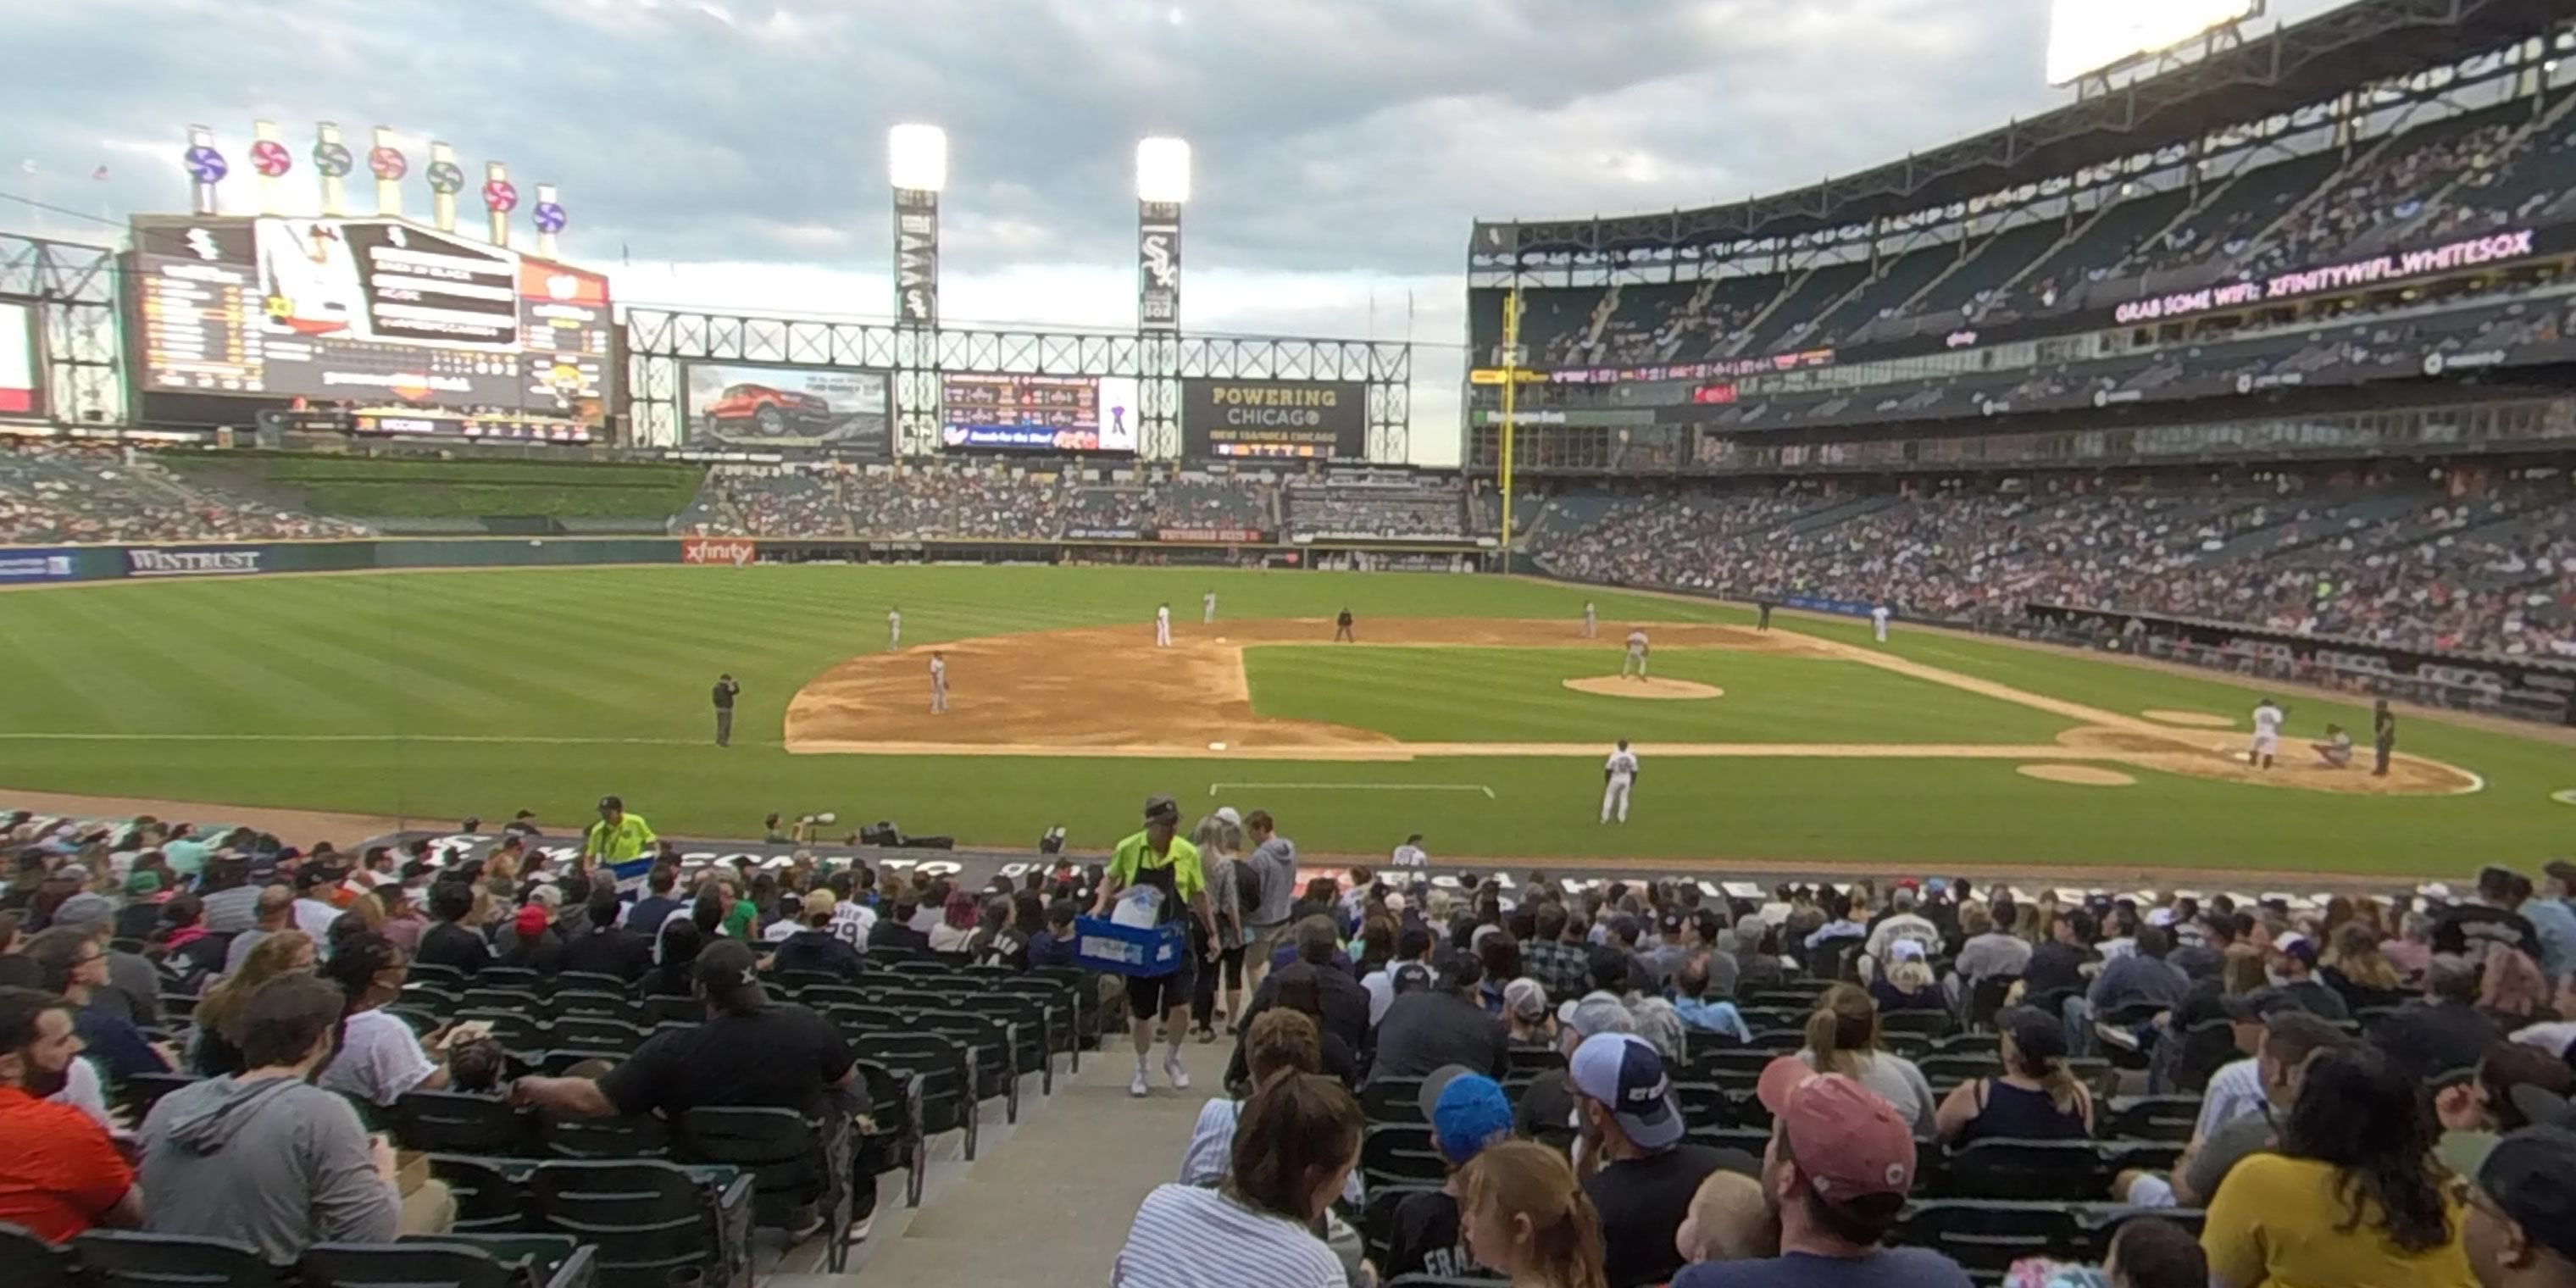 section 140 panoramic seat view  - guaranteed rate field